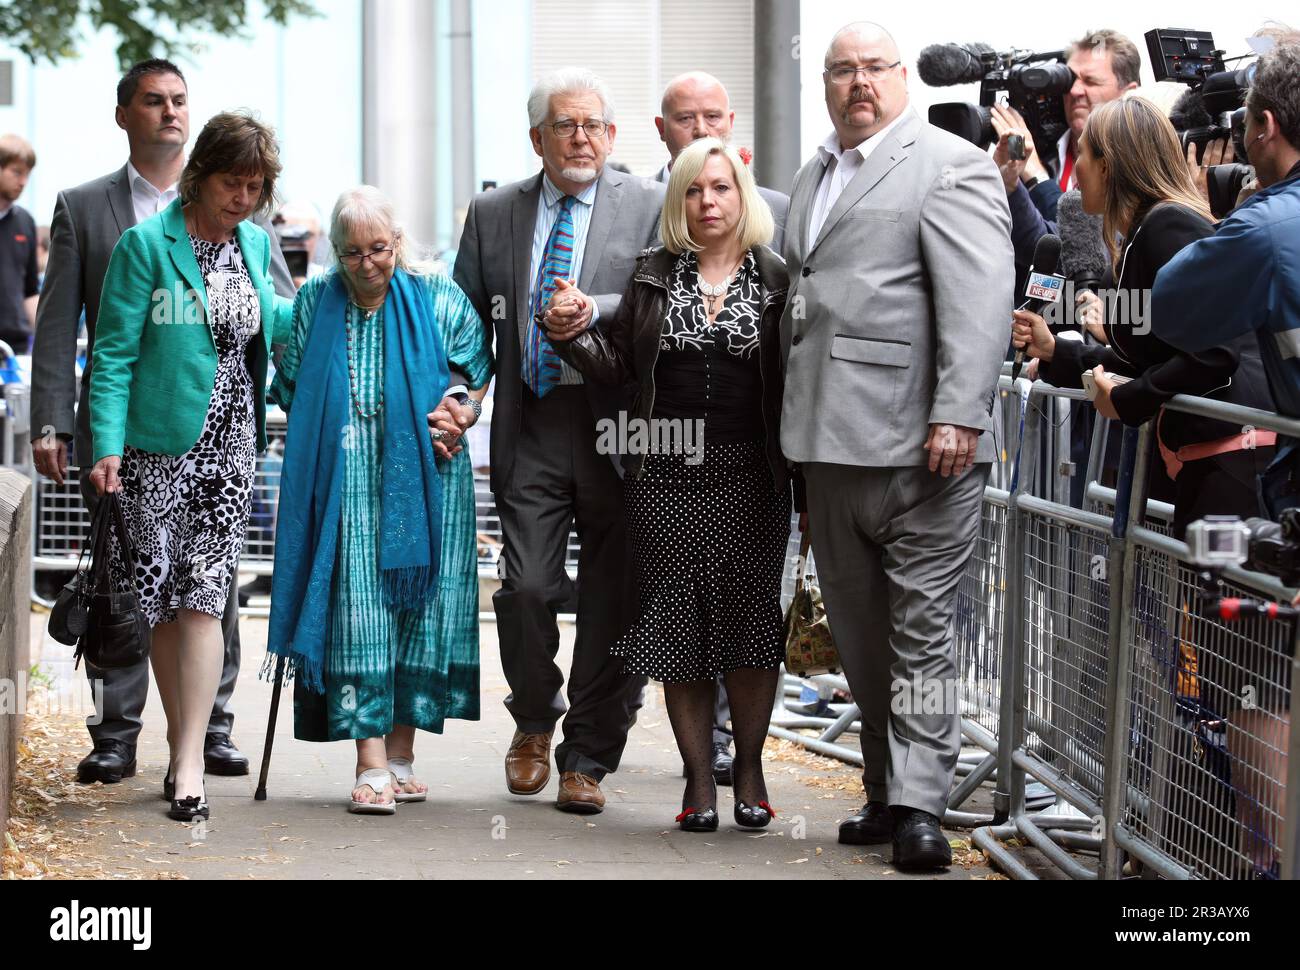 pic shows: 30.6.14Leaving court after being found guilty with wife  Alwen and daughter Bindi  Rolf Harris guilty   Pic by Gavin Rodgers/Pixel 8000 Ltd Stock Photo